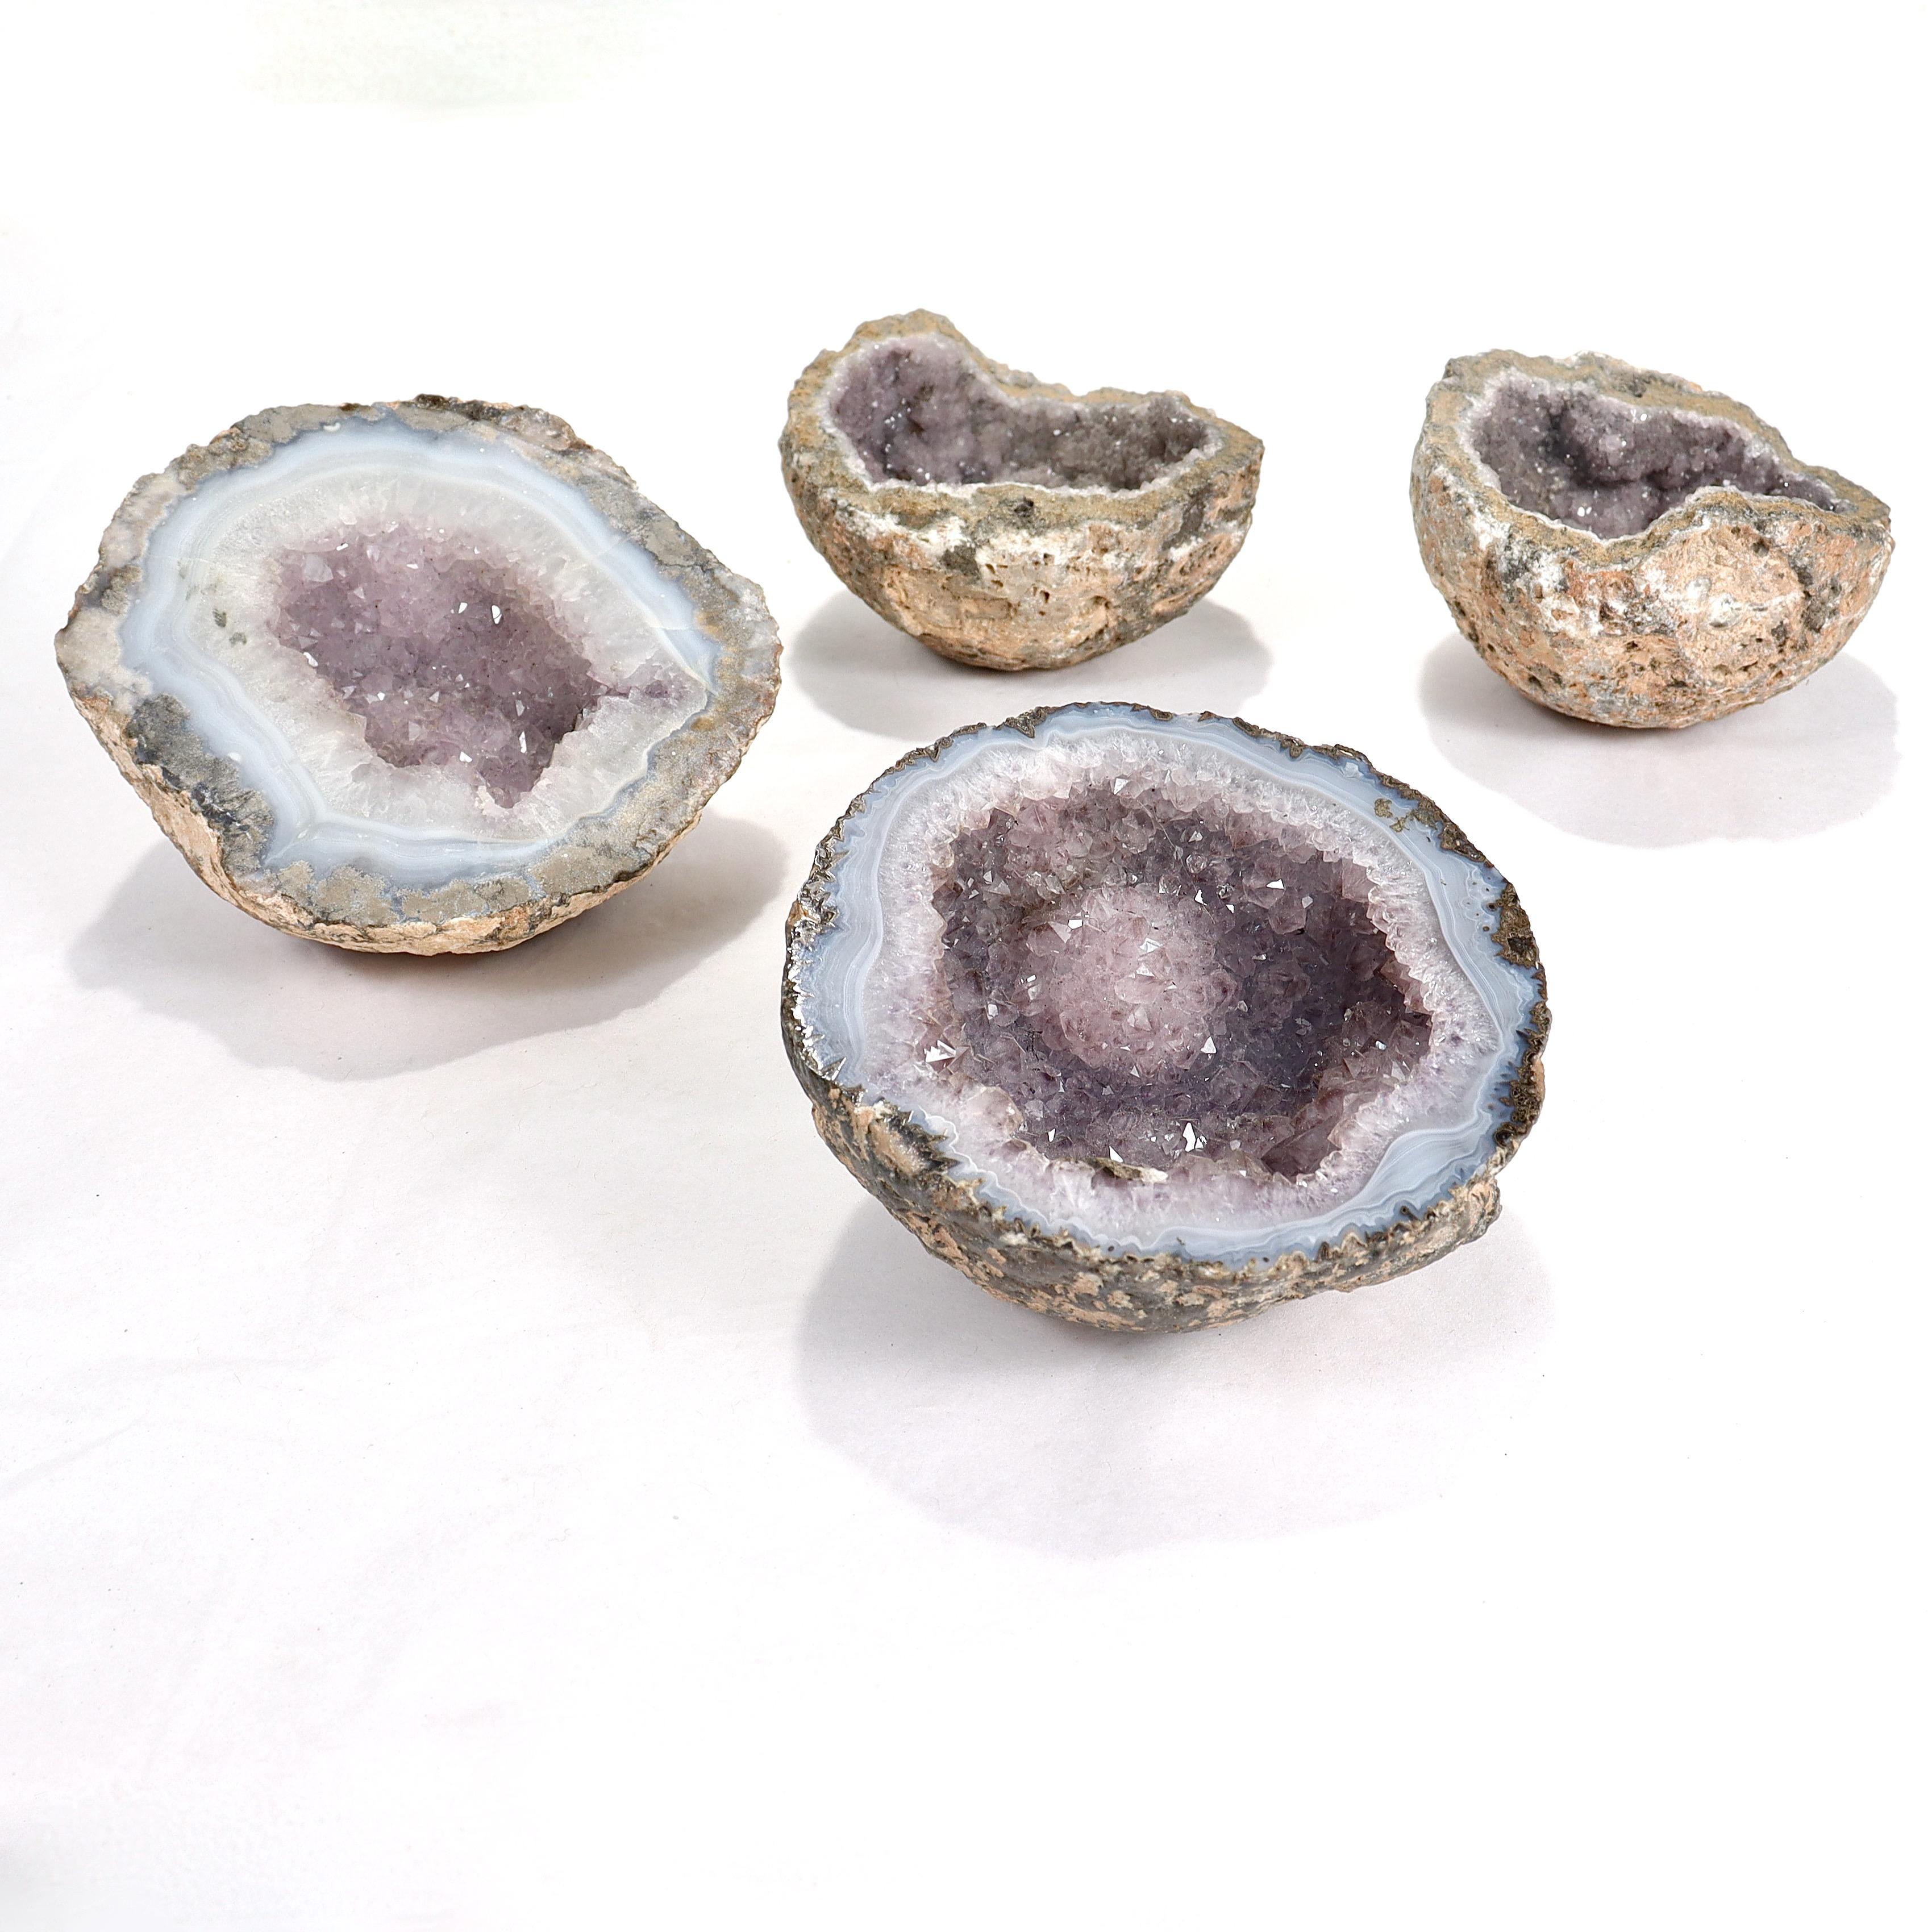 A fine set of 4 amethyst geodes.

The group consists of one pair of complementary halves of the same geode and 2 other examples.

The complementary pair is unpolished, and the other 2 examples are polished

Simply a great group of amethyst